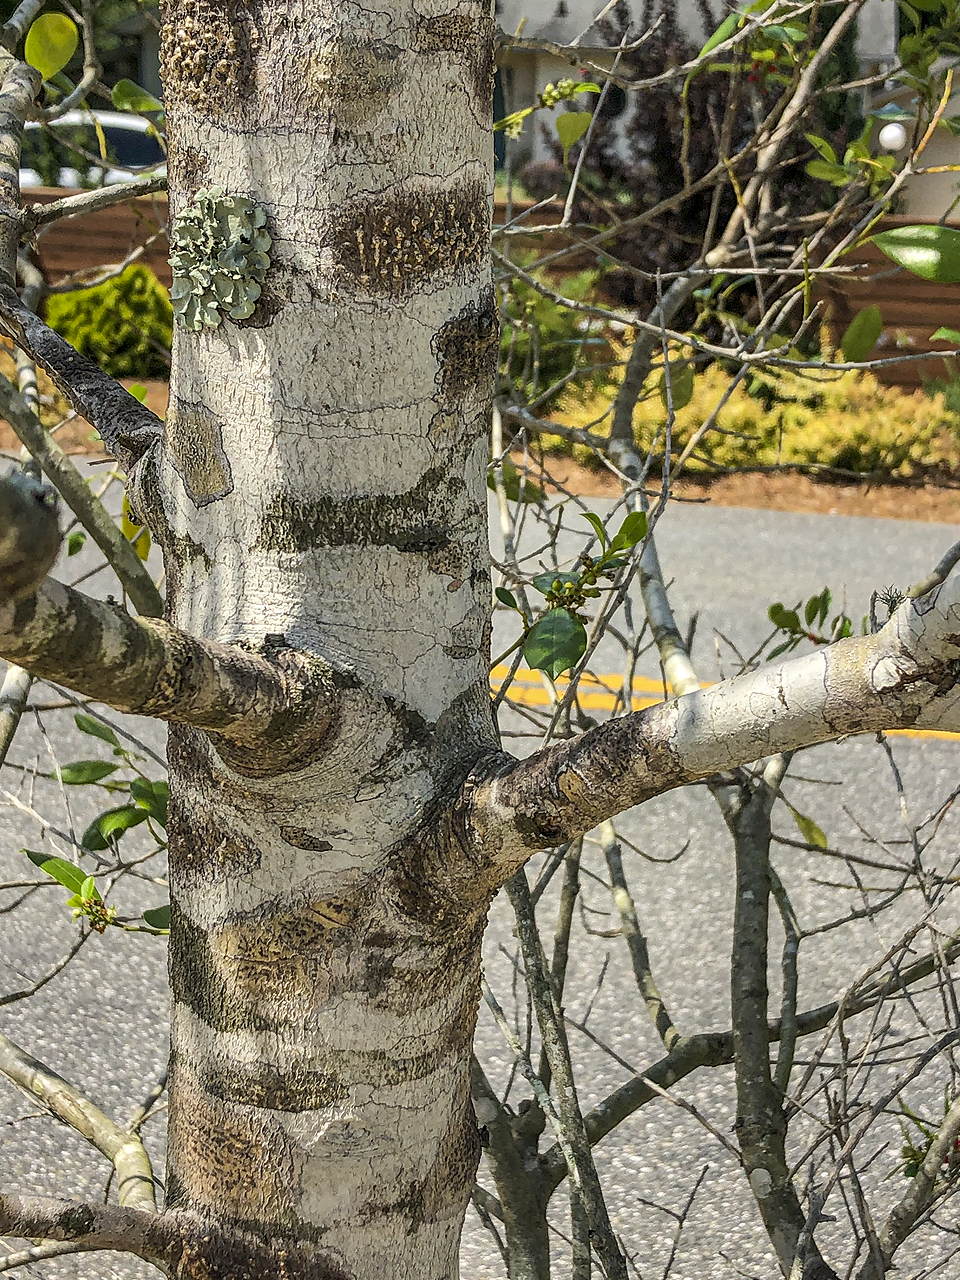 This branch angle is well formed, allowing  plenty of space for both the trunk and branch to expand.